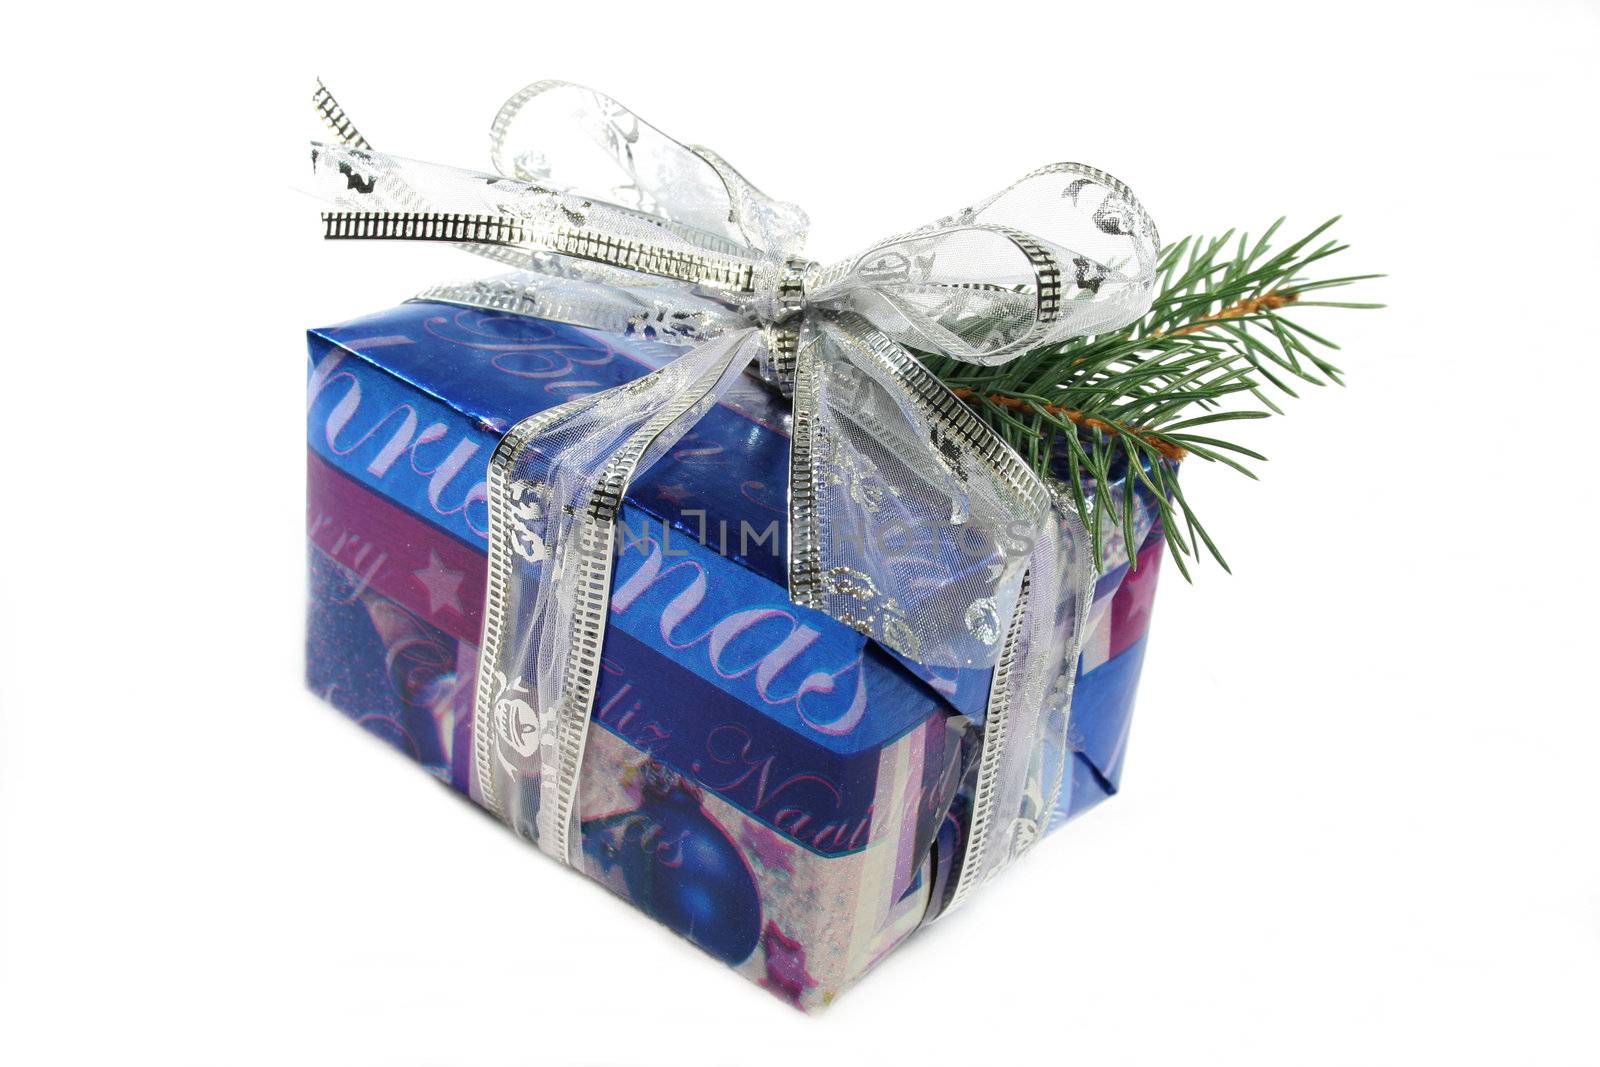 Blue Christmas gift on a white background